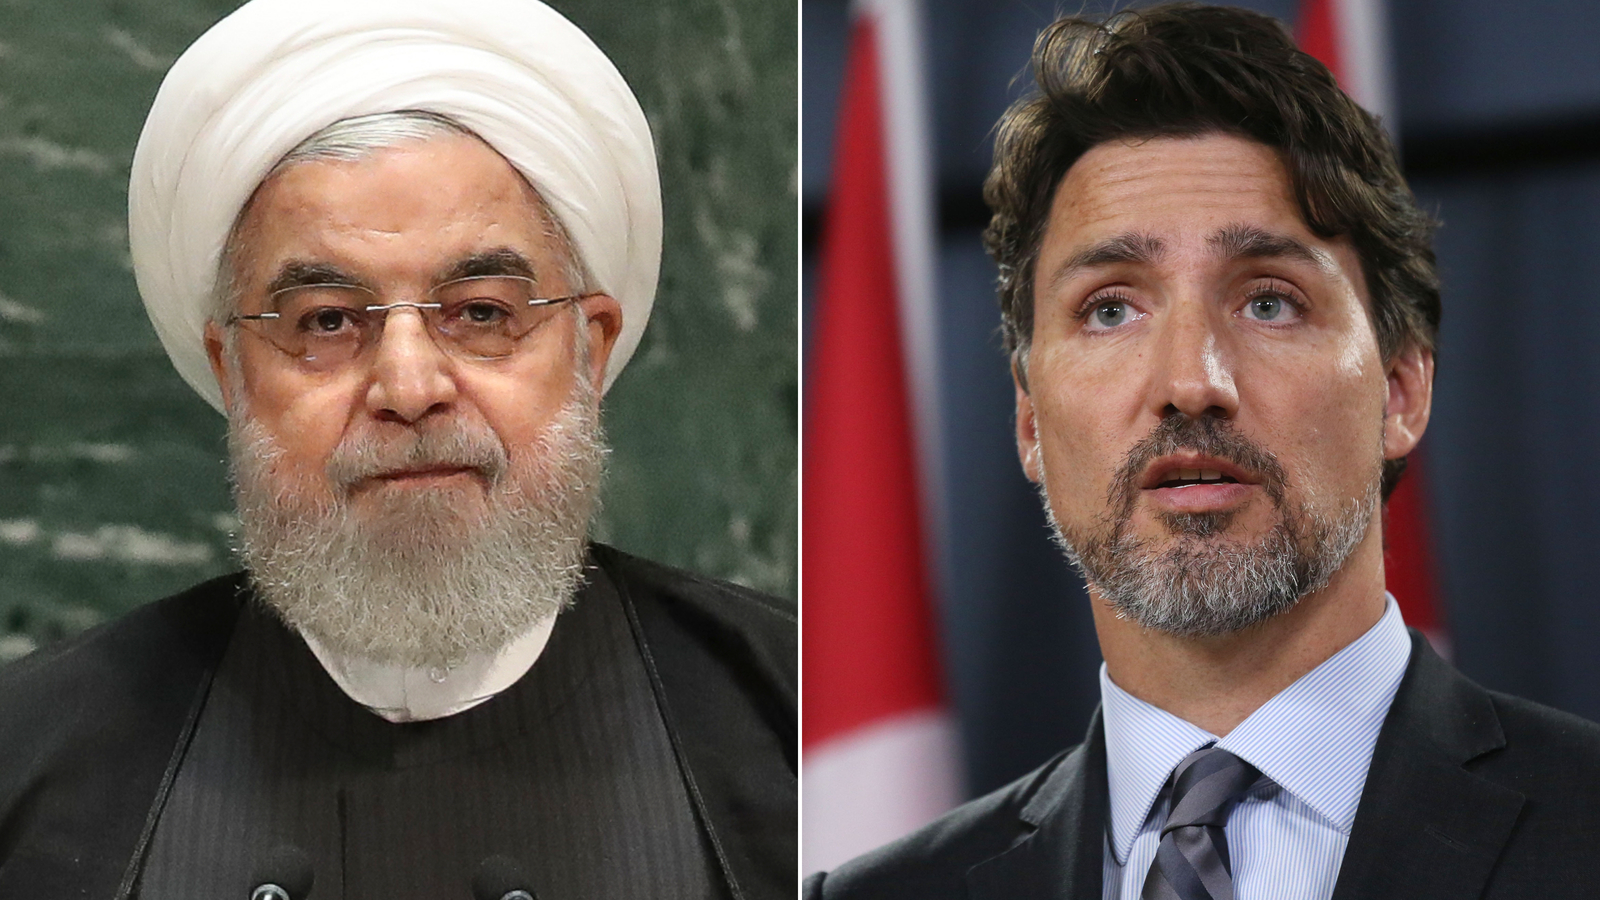 Iranian President Hassan Rouhani and Canadian Prime Minister Justin Trudeau 